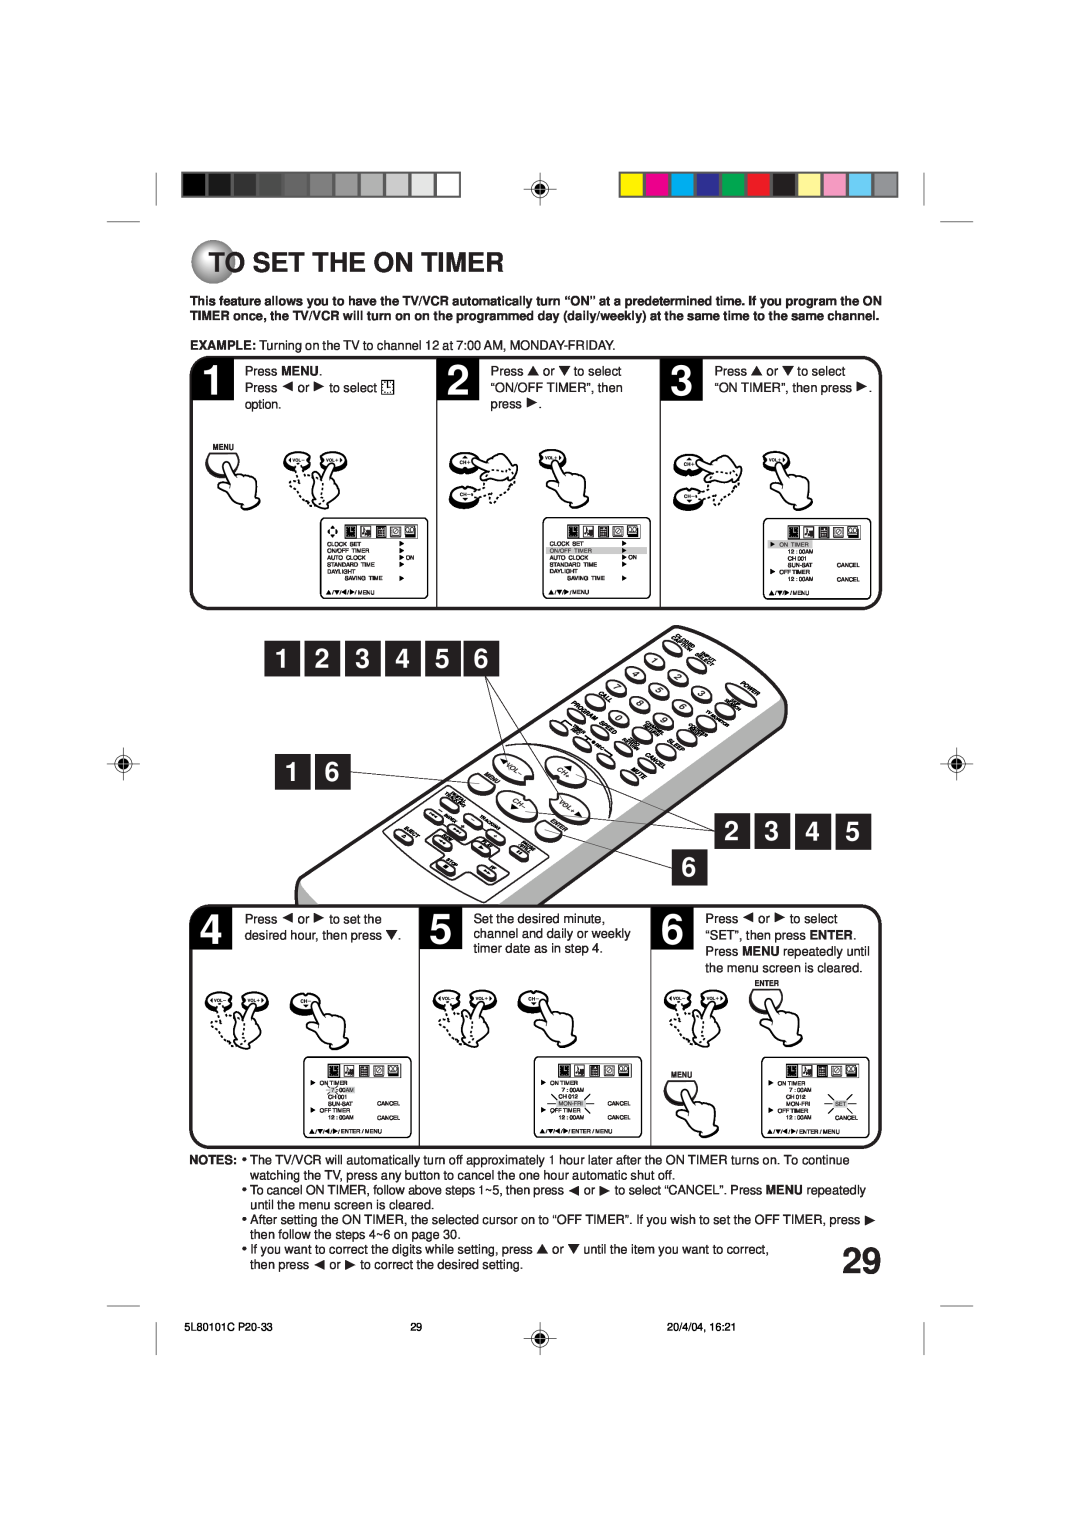 Toshiba MV13P2 owner manual To Set The On Timer, 1 2 1, 3 4 5, 2 3 4 